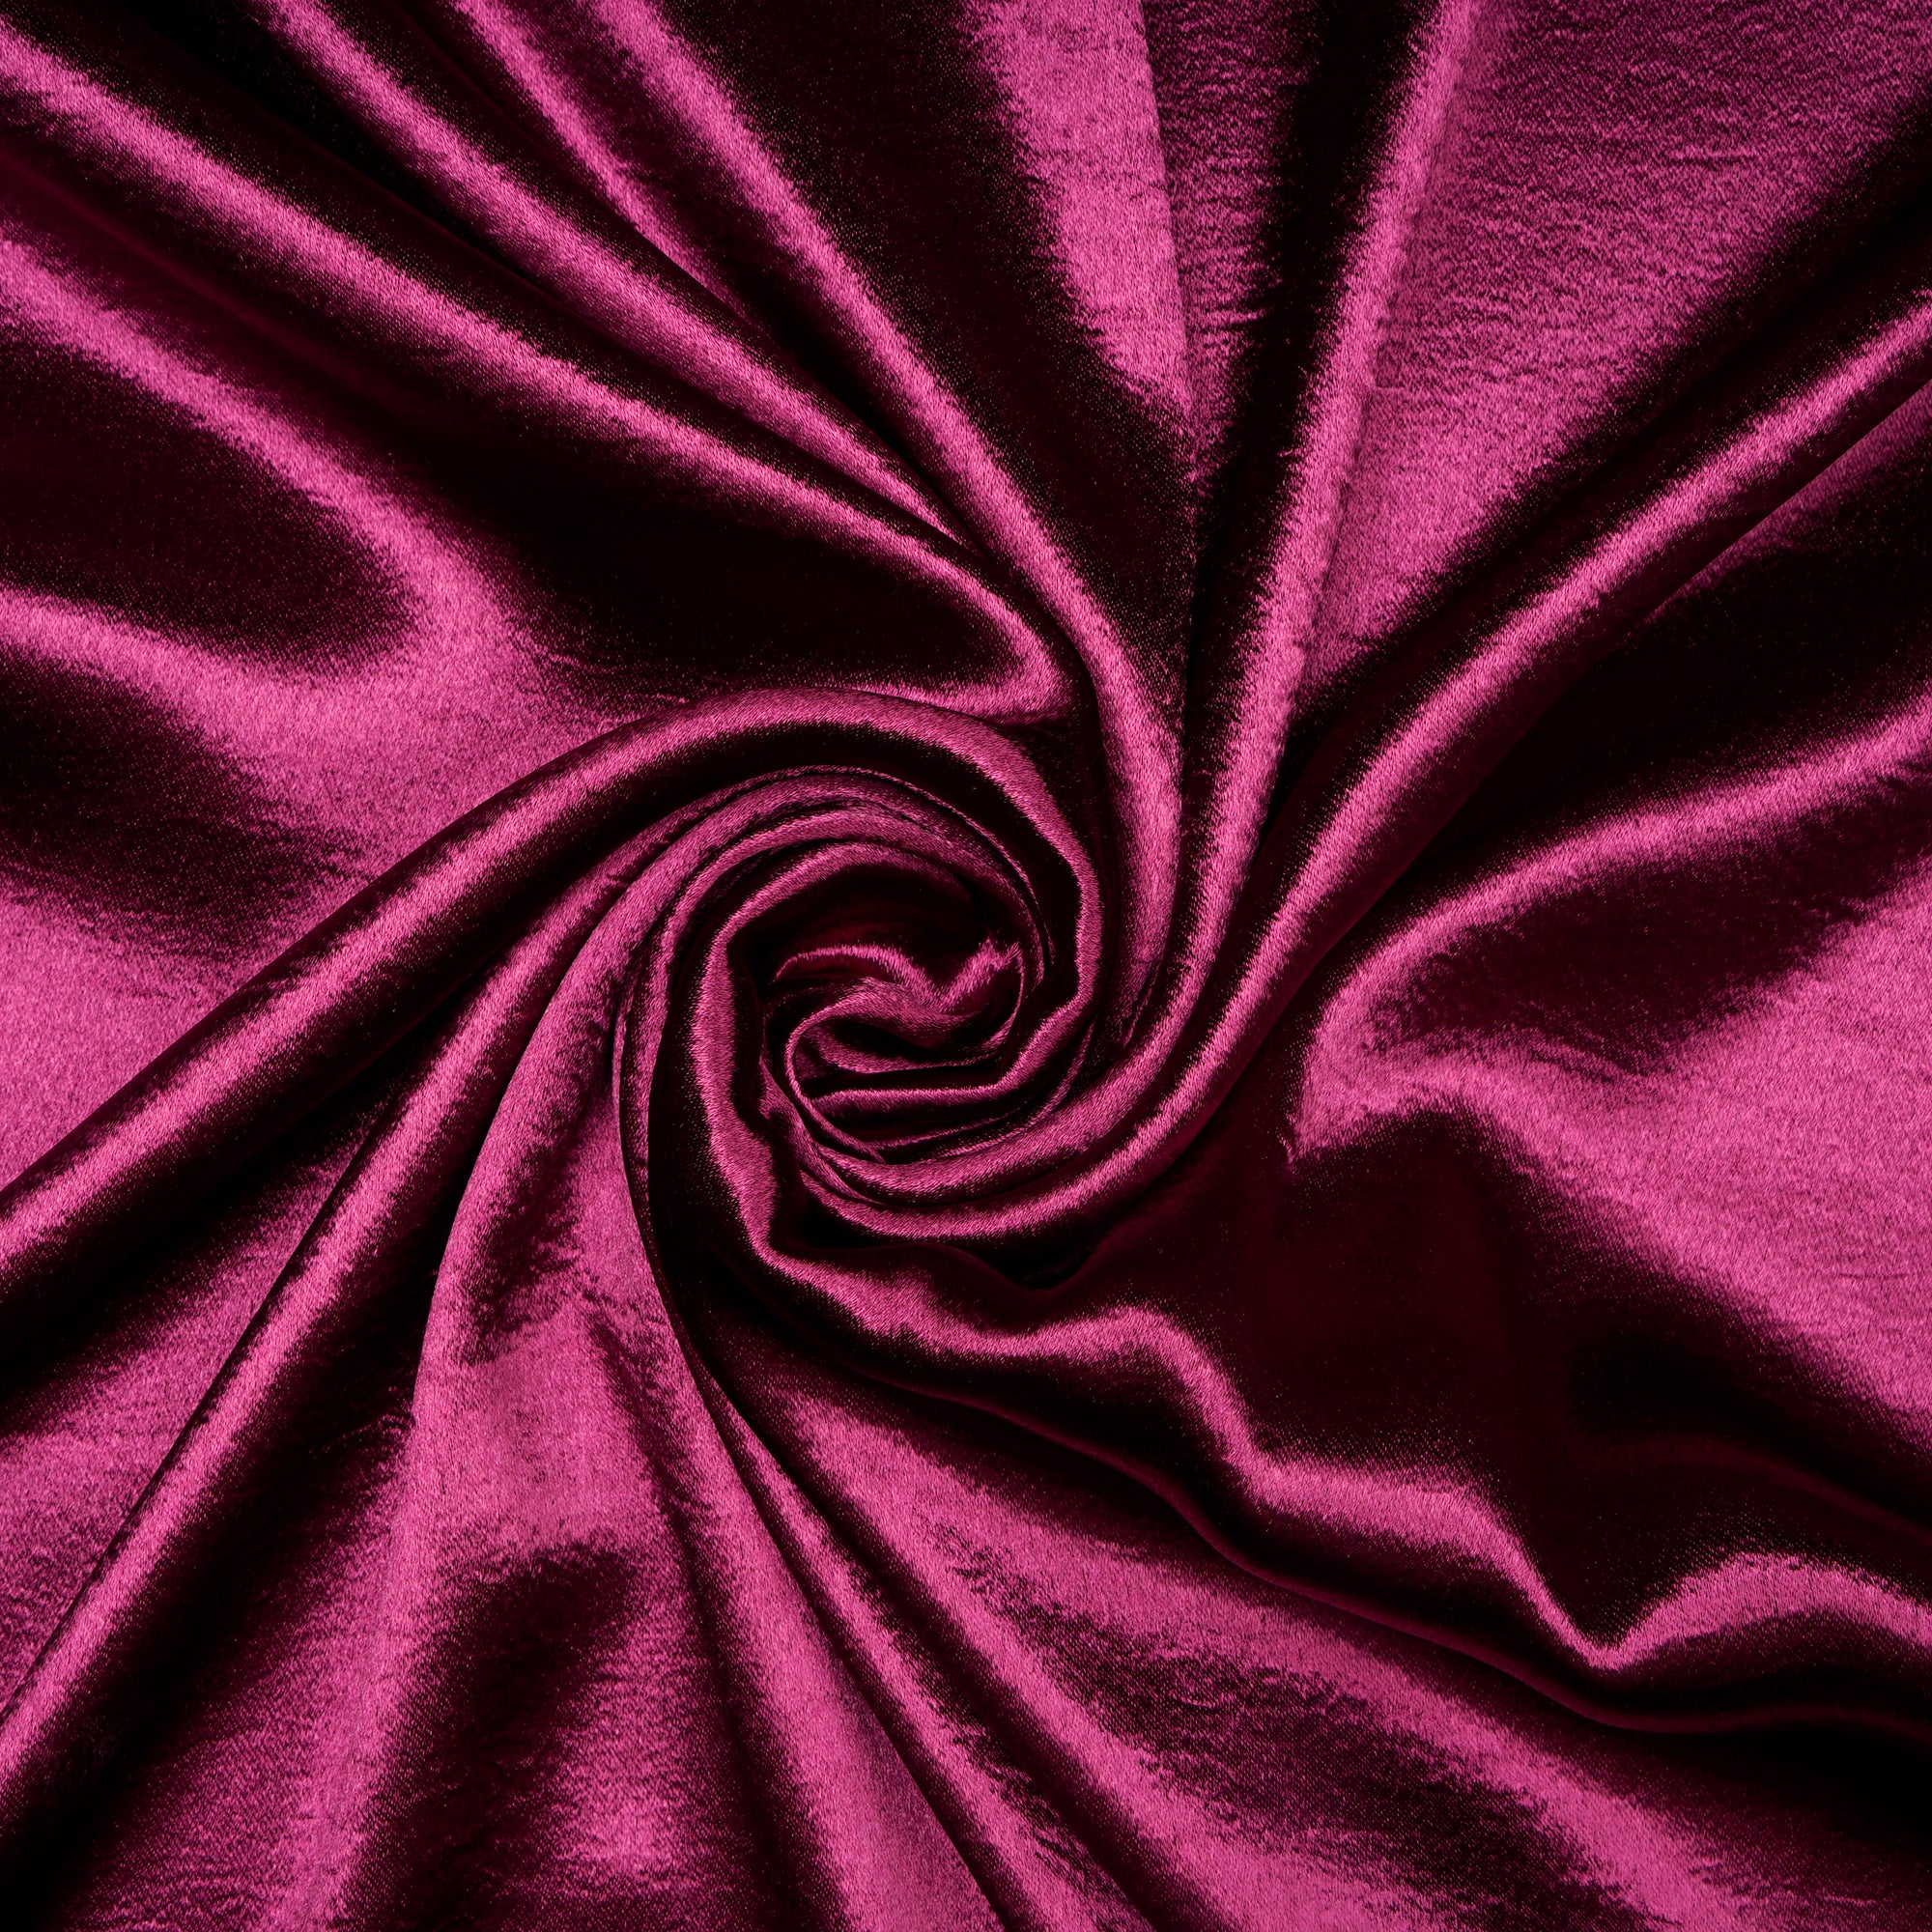 Magenta Solid Dyed Imported Lido Satin Fabric (60" Width)